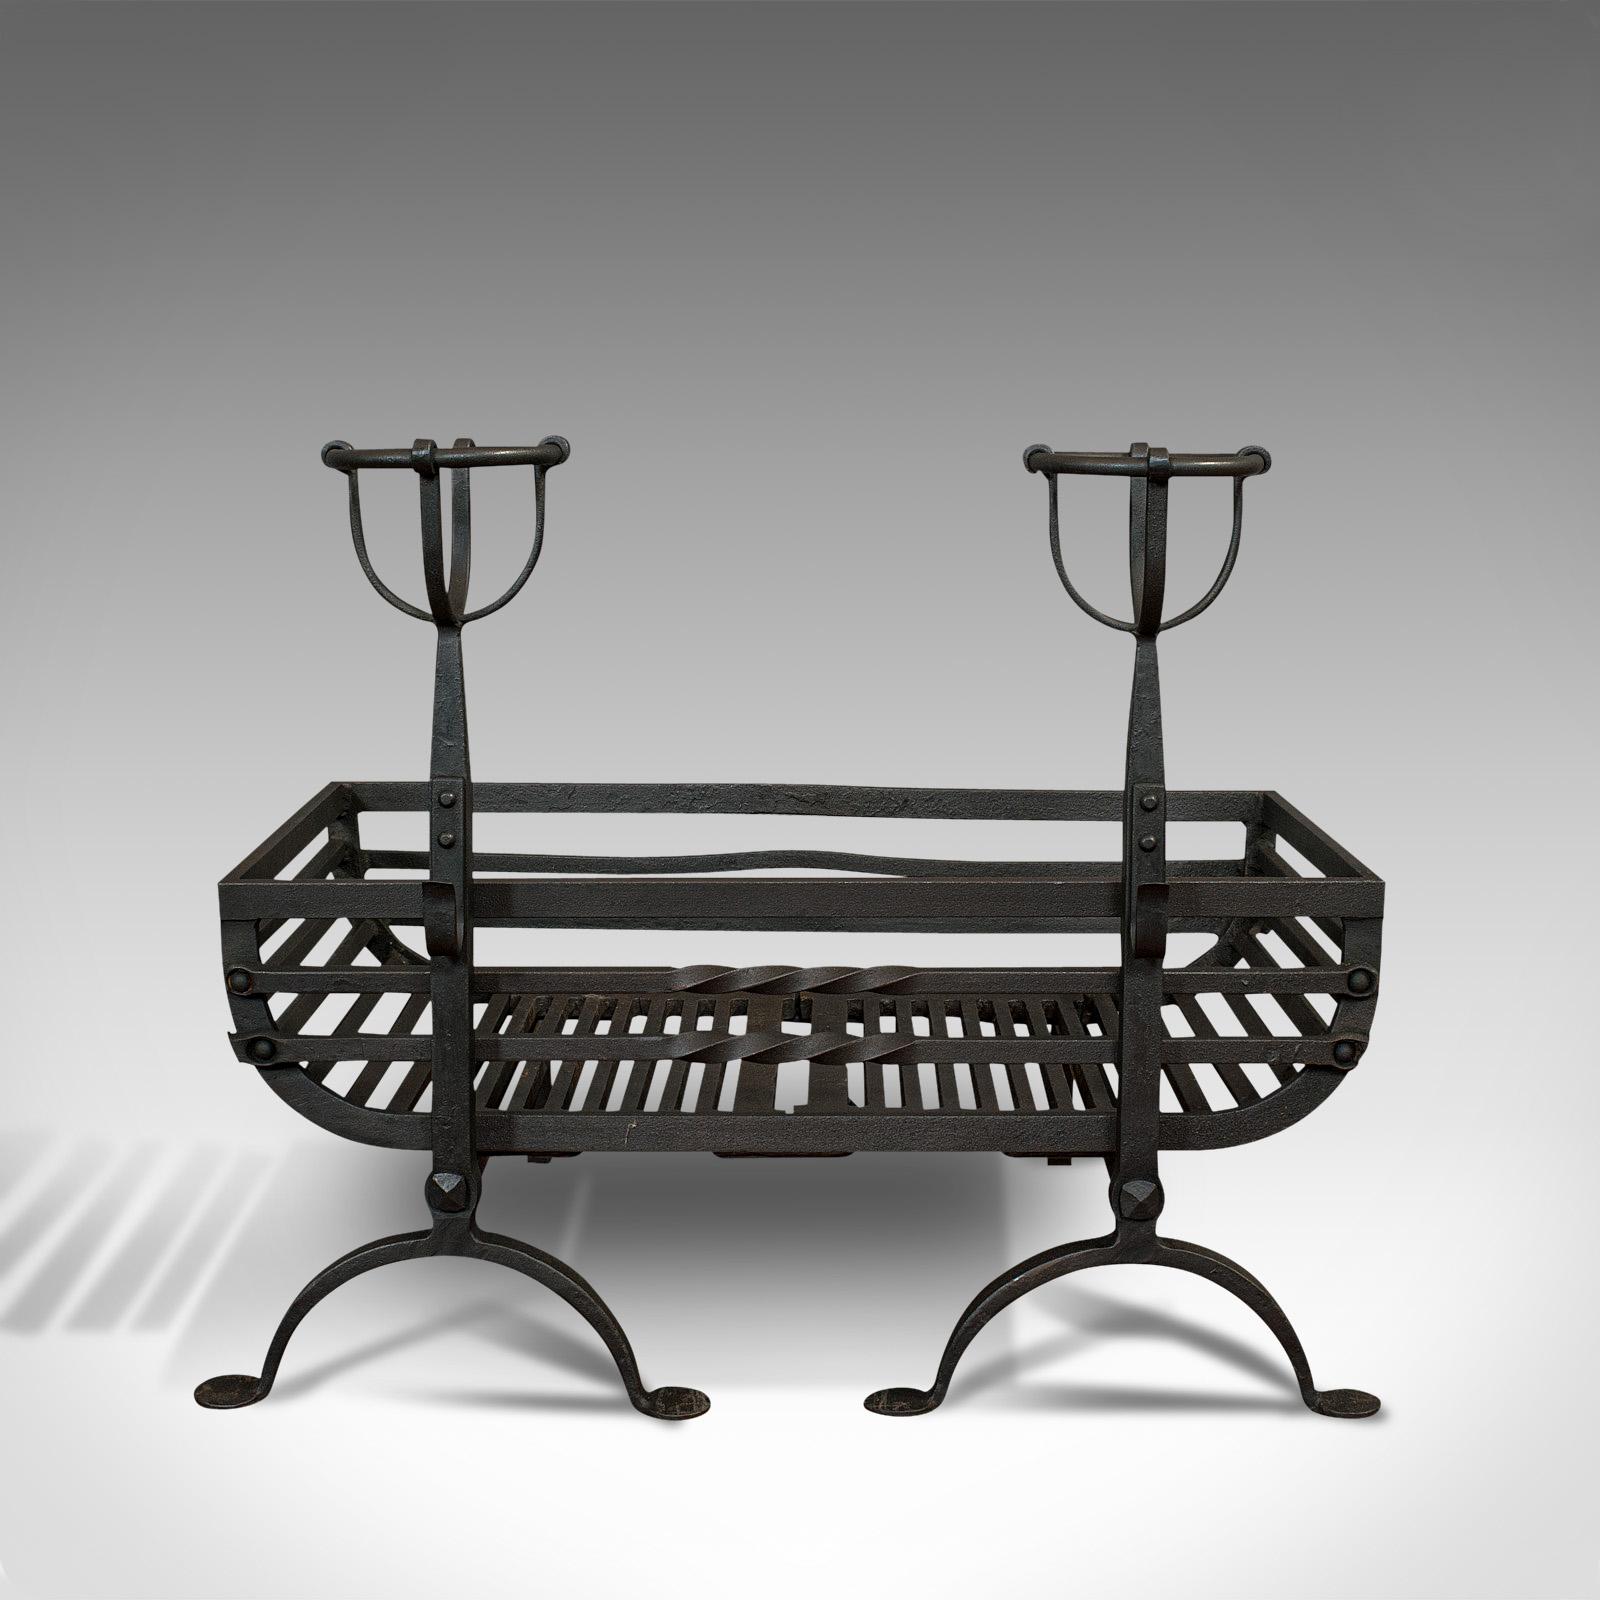 This is an antique fire basket and pair of andirons. An English, iron fireside suite, dating to the Victorian period, circa 1900.

Superb fire basket and dashing fire dog set
Displaying a desirable aged patina
Wrought iron basket offers a